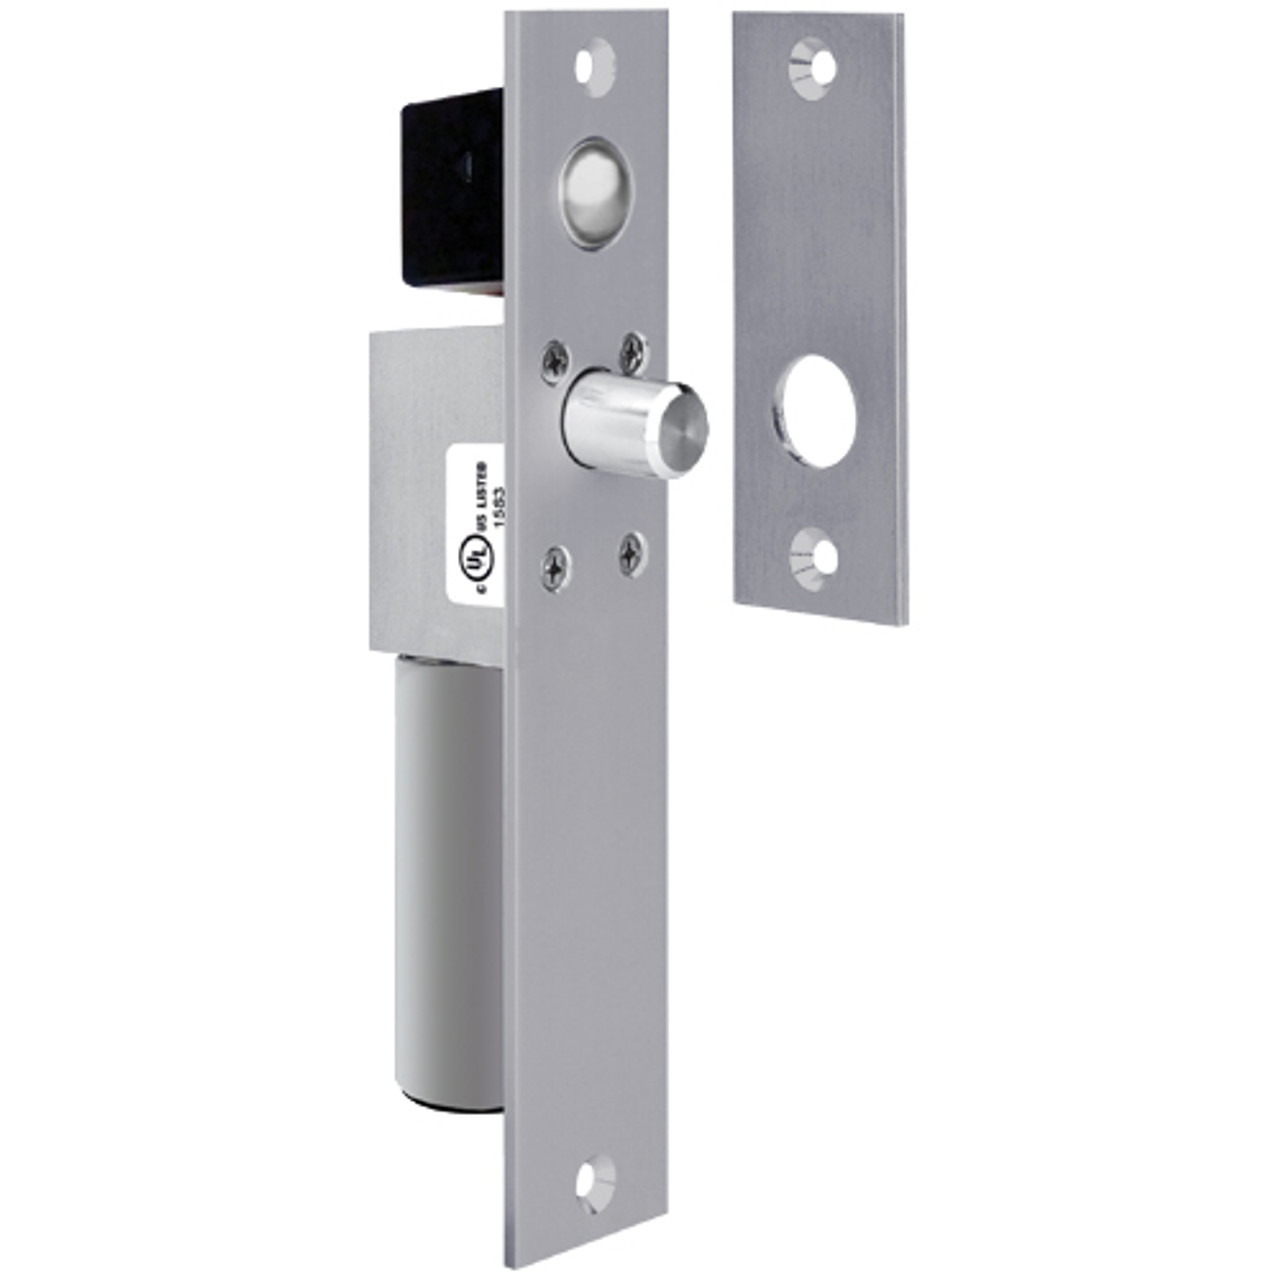 1490AIQB SDC Fits 1-1/2 inche Frame Non UL FailSafe Spacesaver Mortise Bolt Lock with Bolt Position Sensor in Dull Chrome